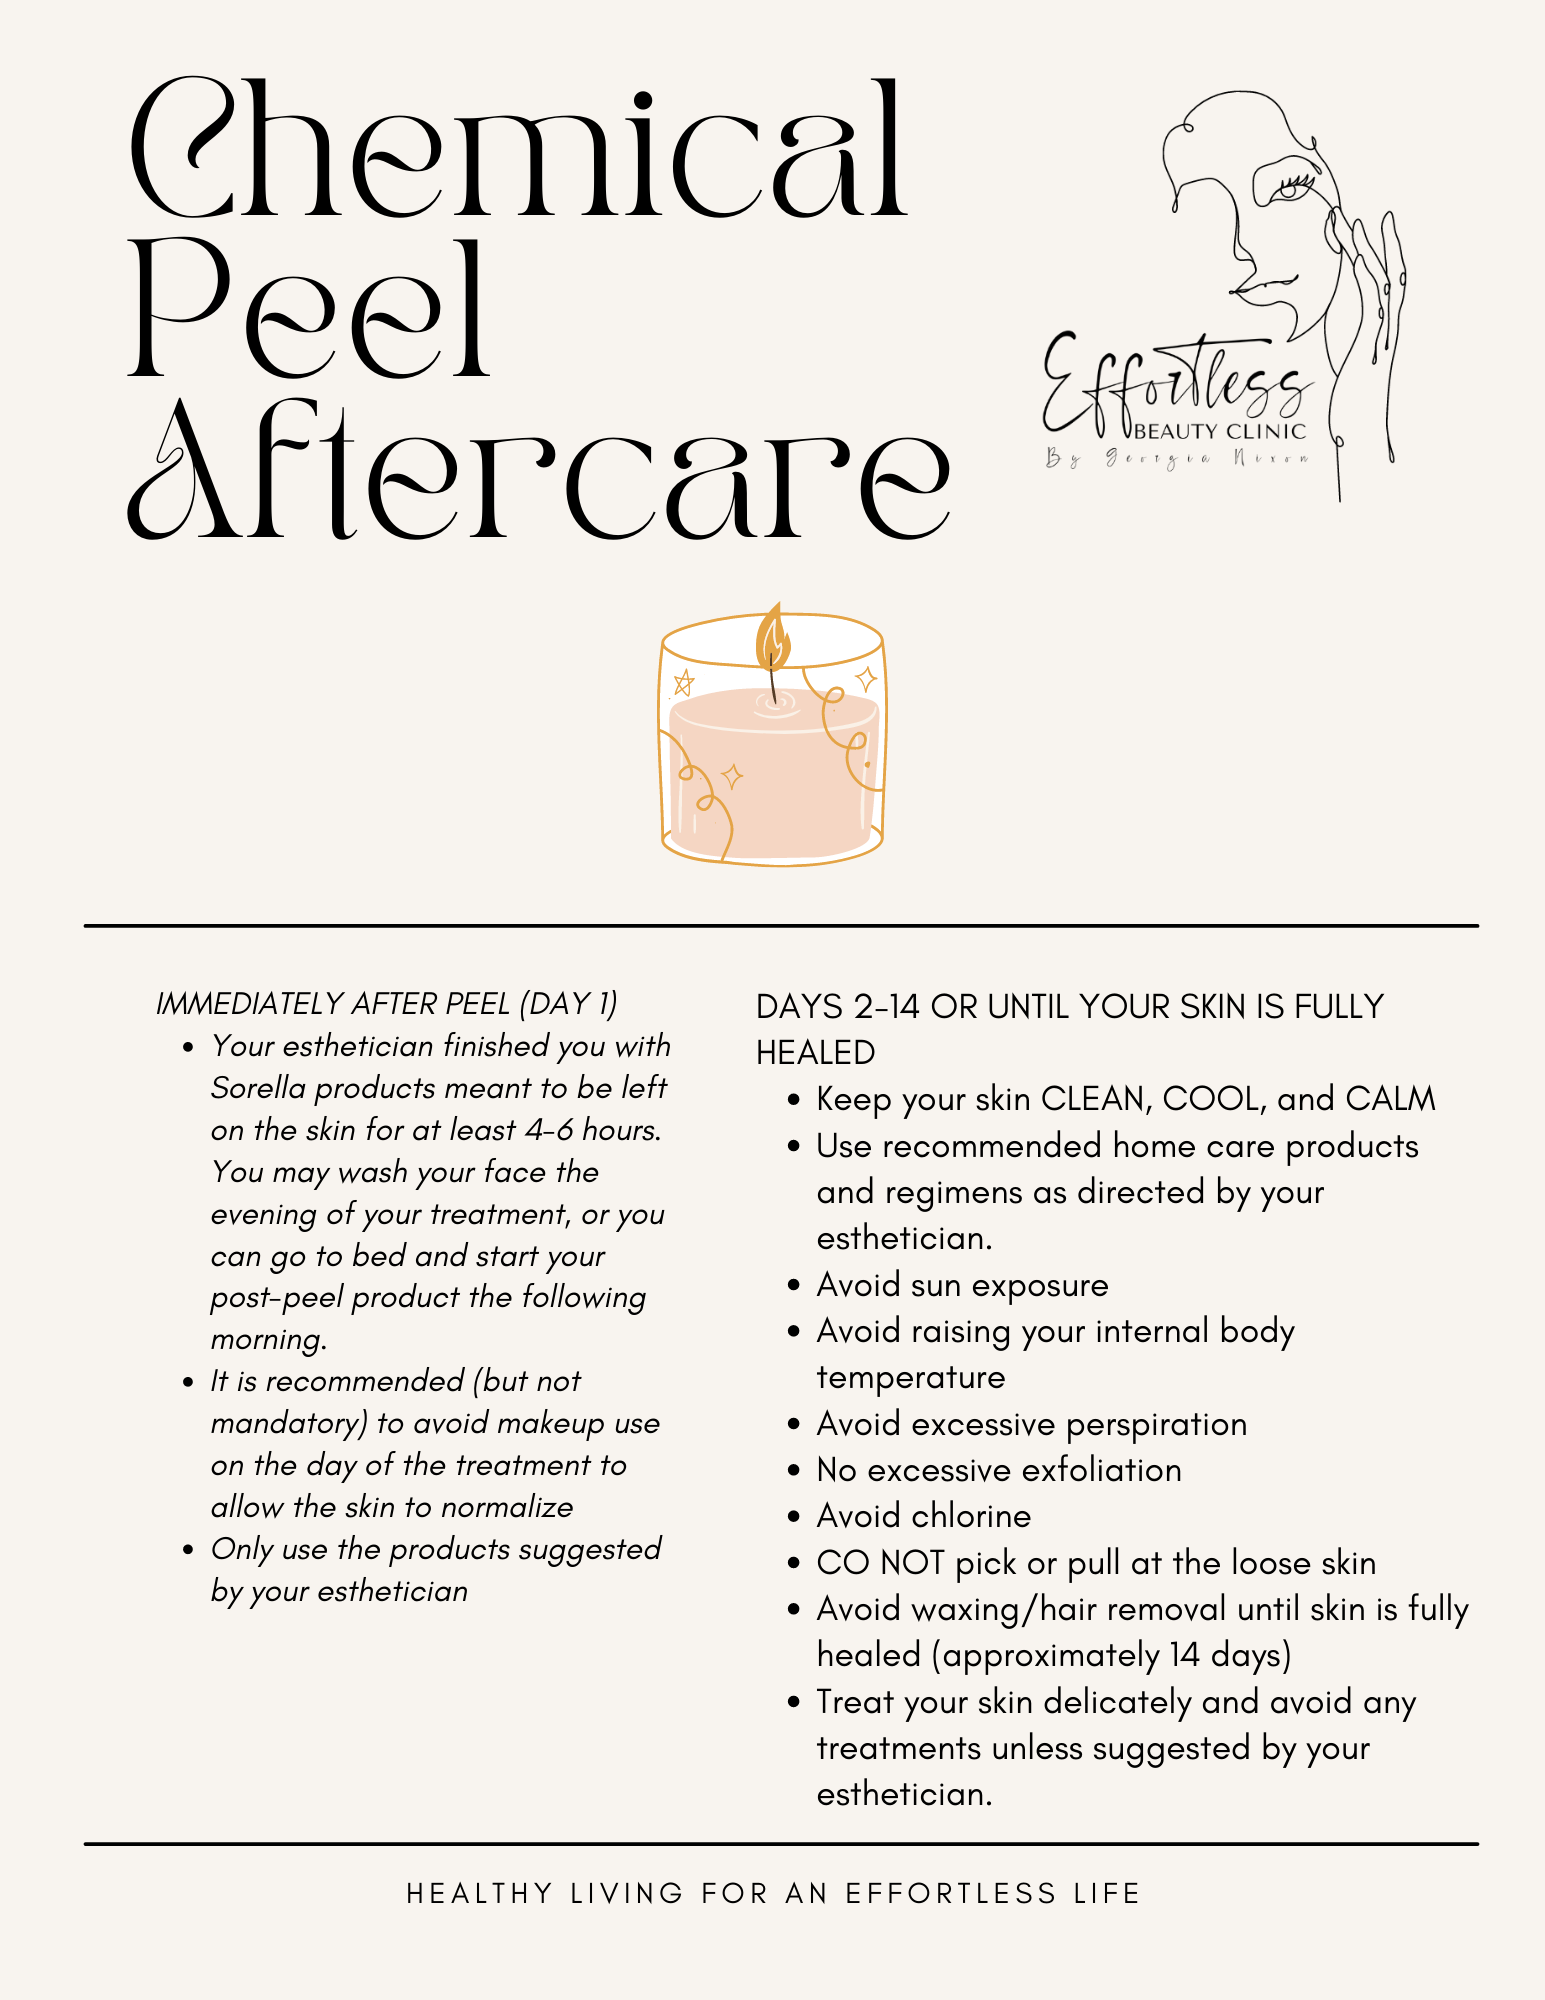 chemical peel aftercare instructions